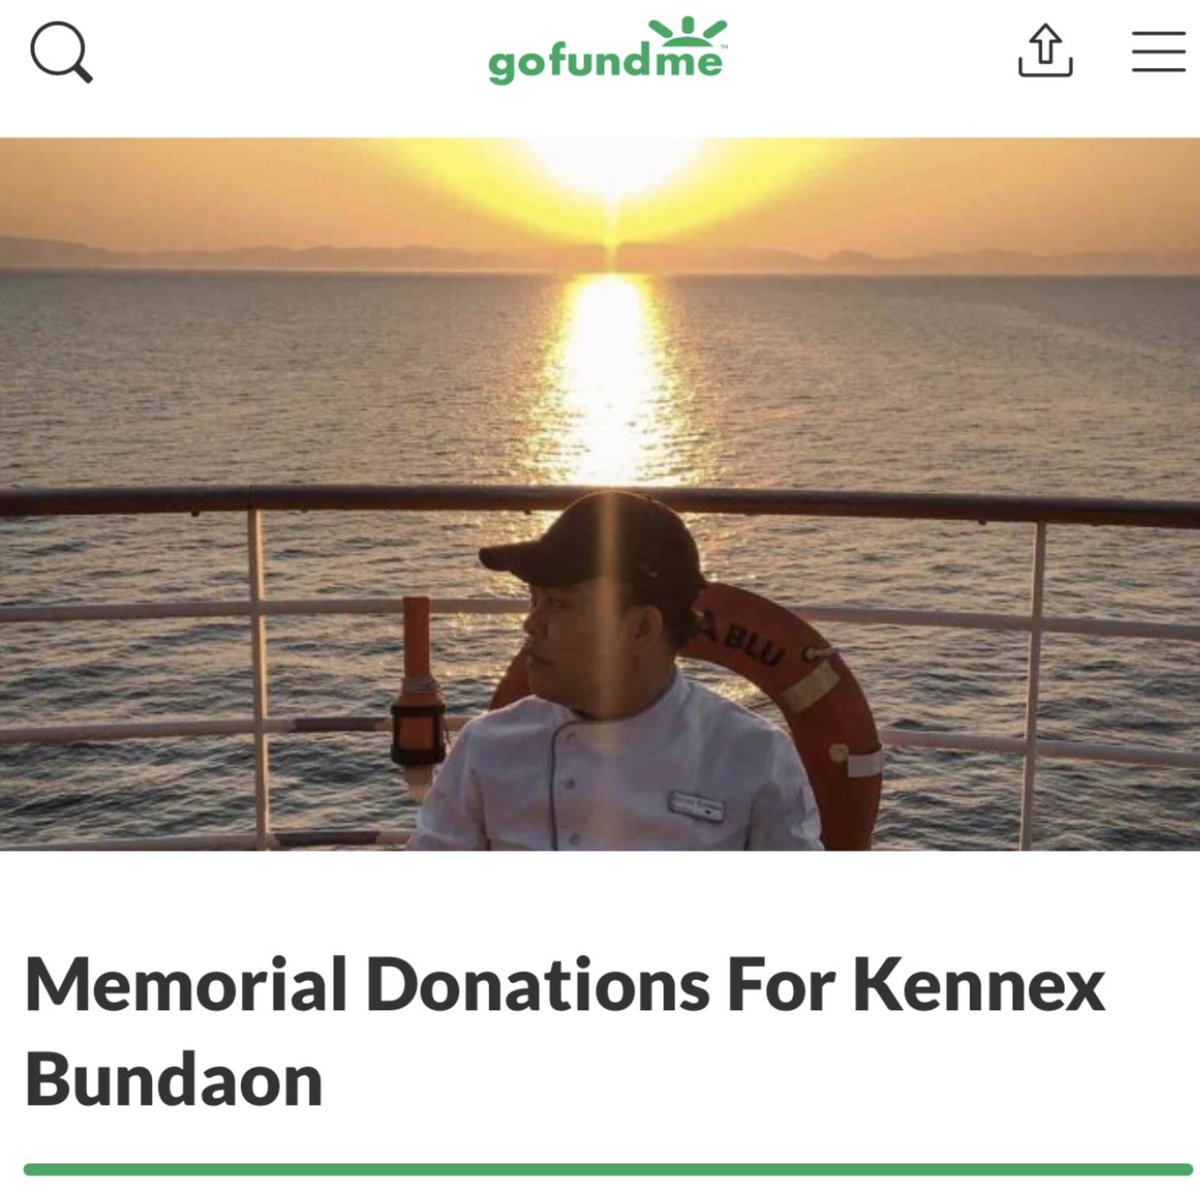 A GoFundMe page in honor of cook Kennex Bundaondescribed him as an avid traveler with the “chillest vibe”  http://trib.al/HHBt5KS 